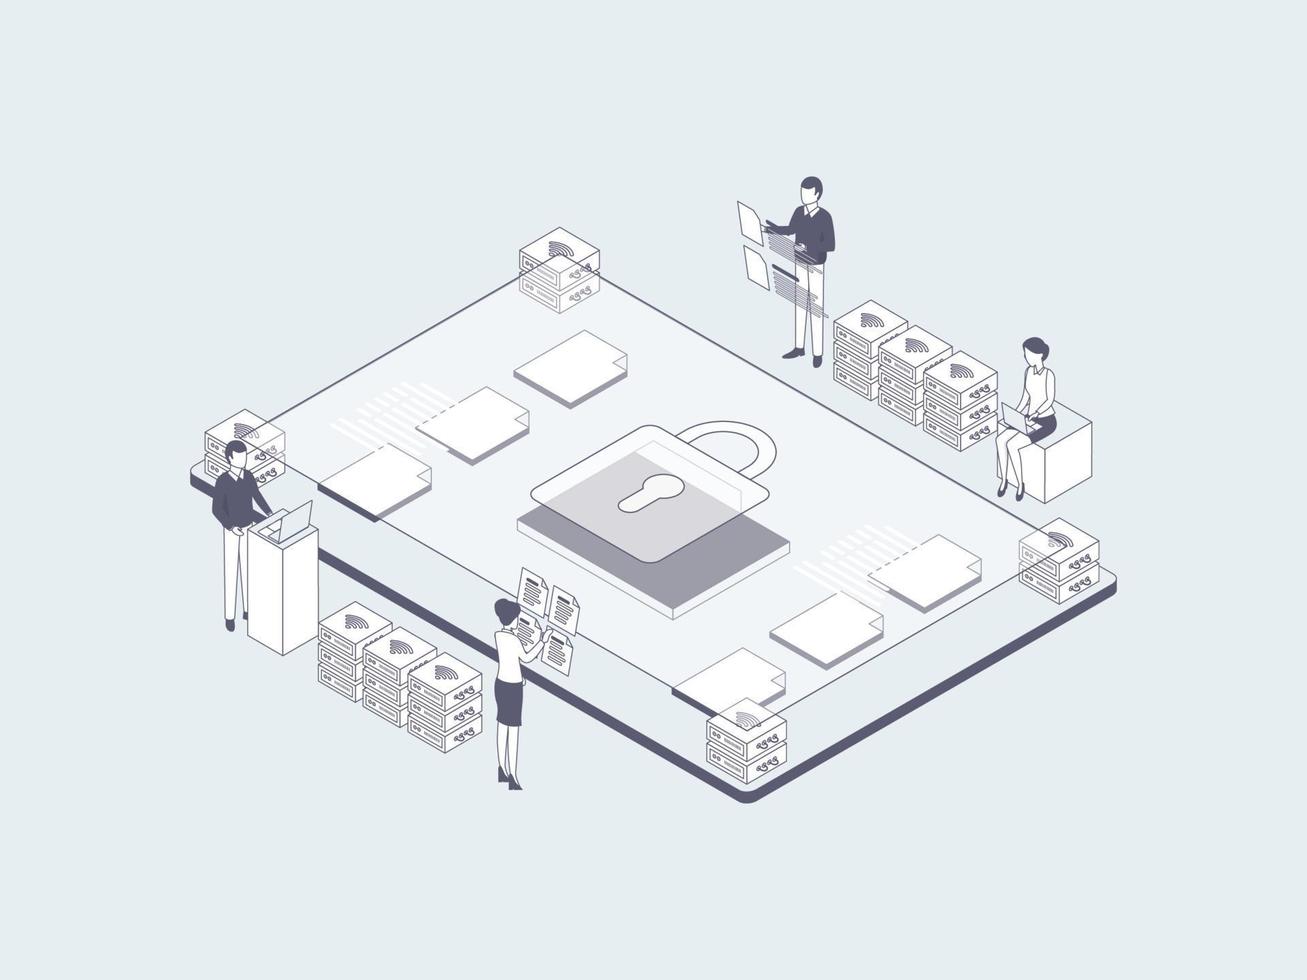 Business Security Isometric Illustration Lineal Grey. Suitable for Mobile App, Website, Banner, Diagrams, Infographics, and Other Graphic Assets. vector